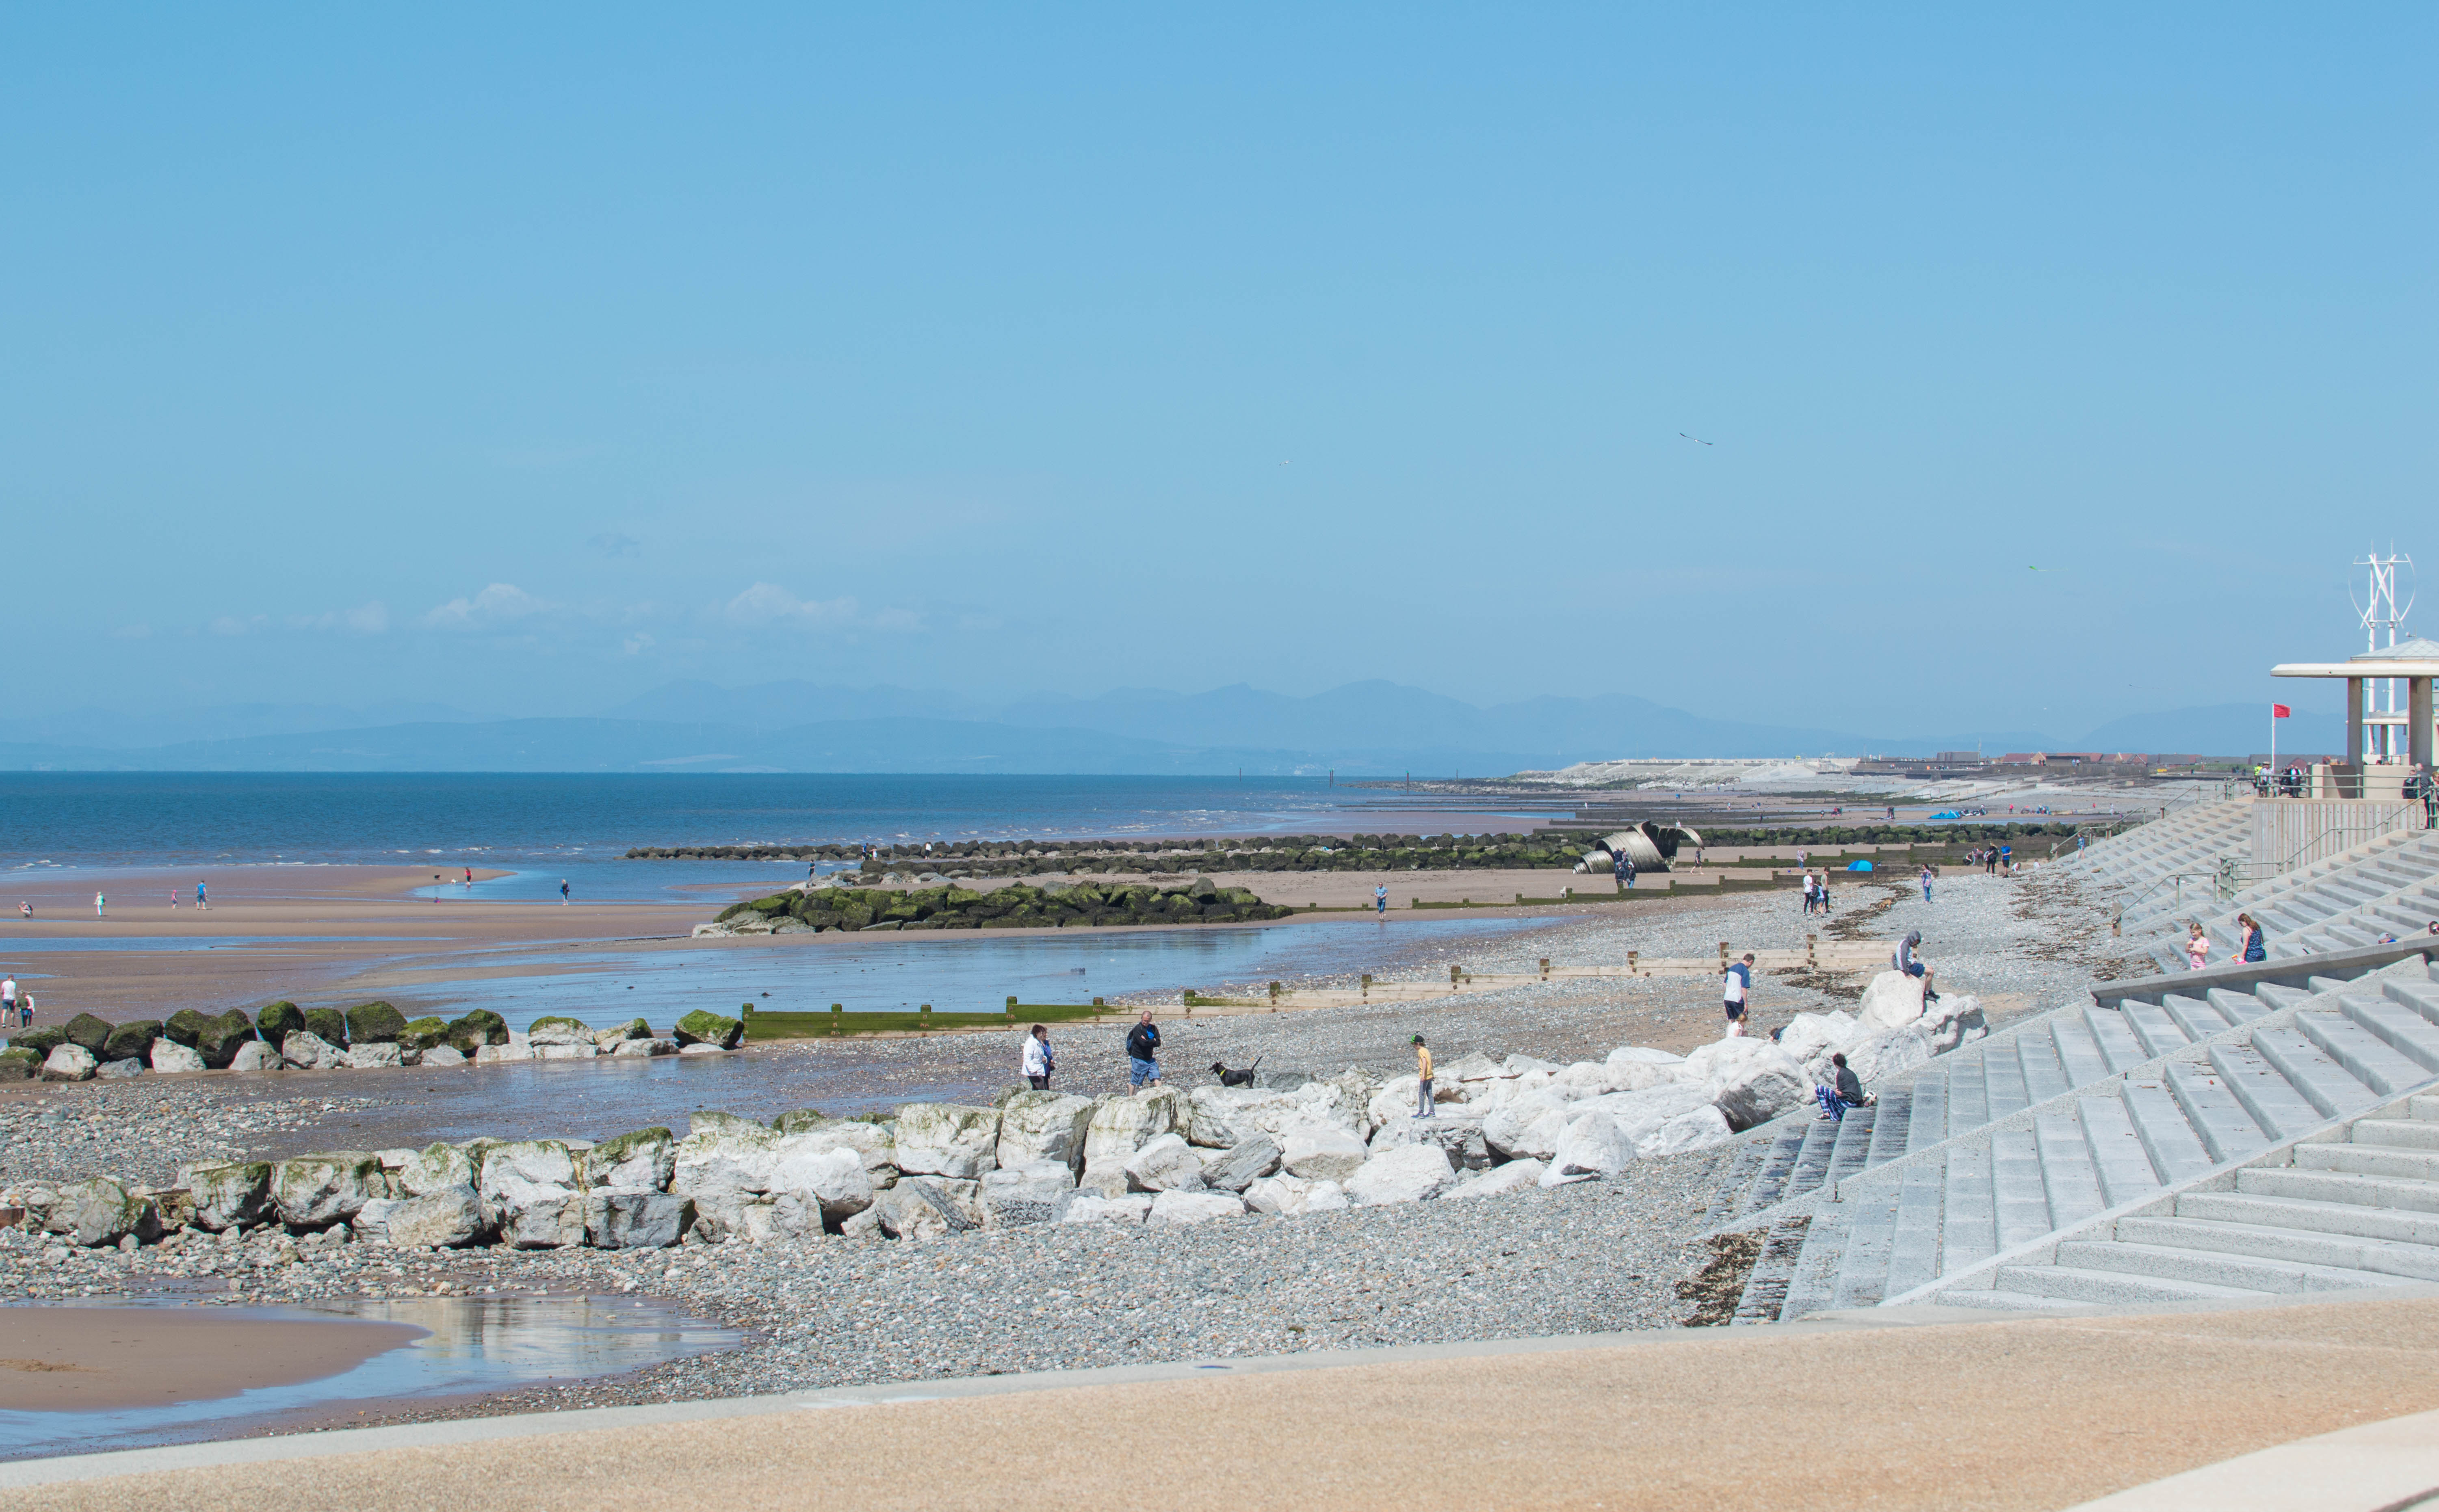 A view of the beach and promenade at Cleveleys